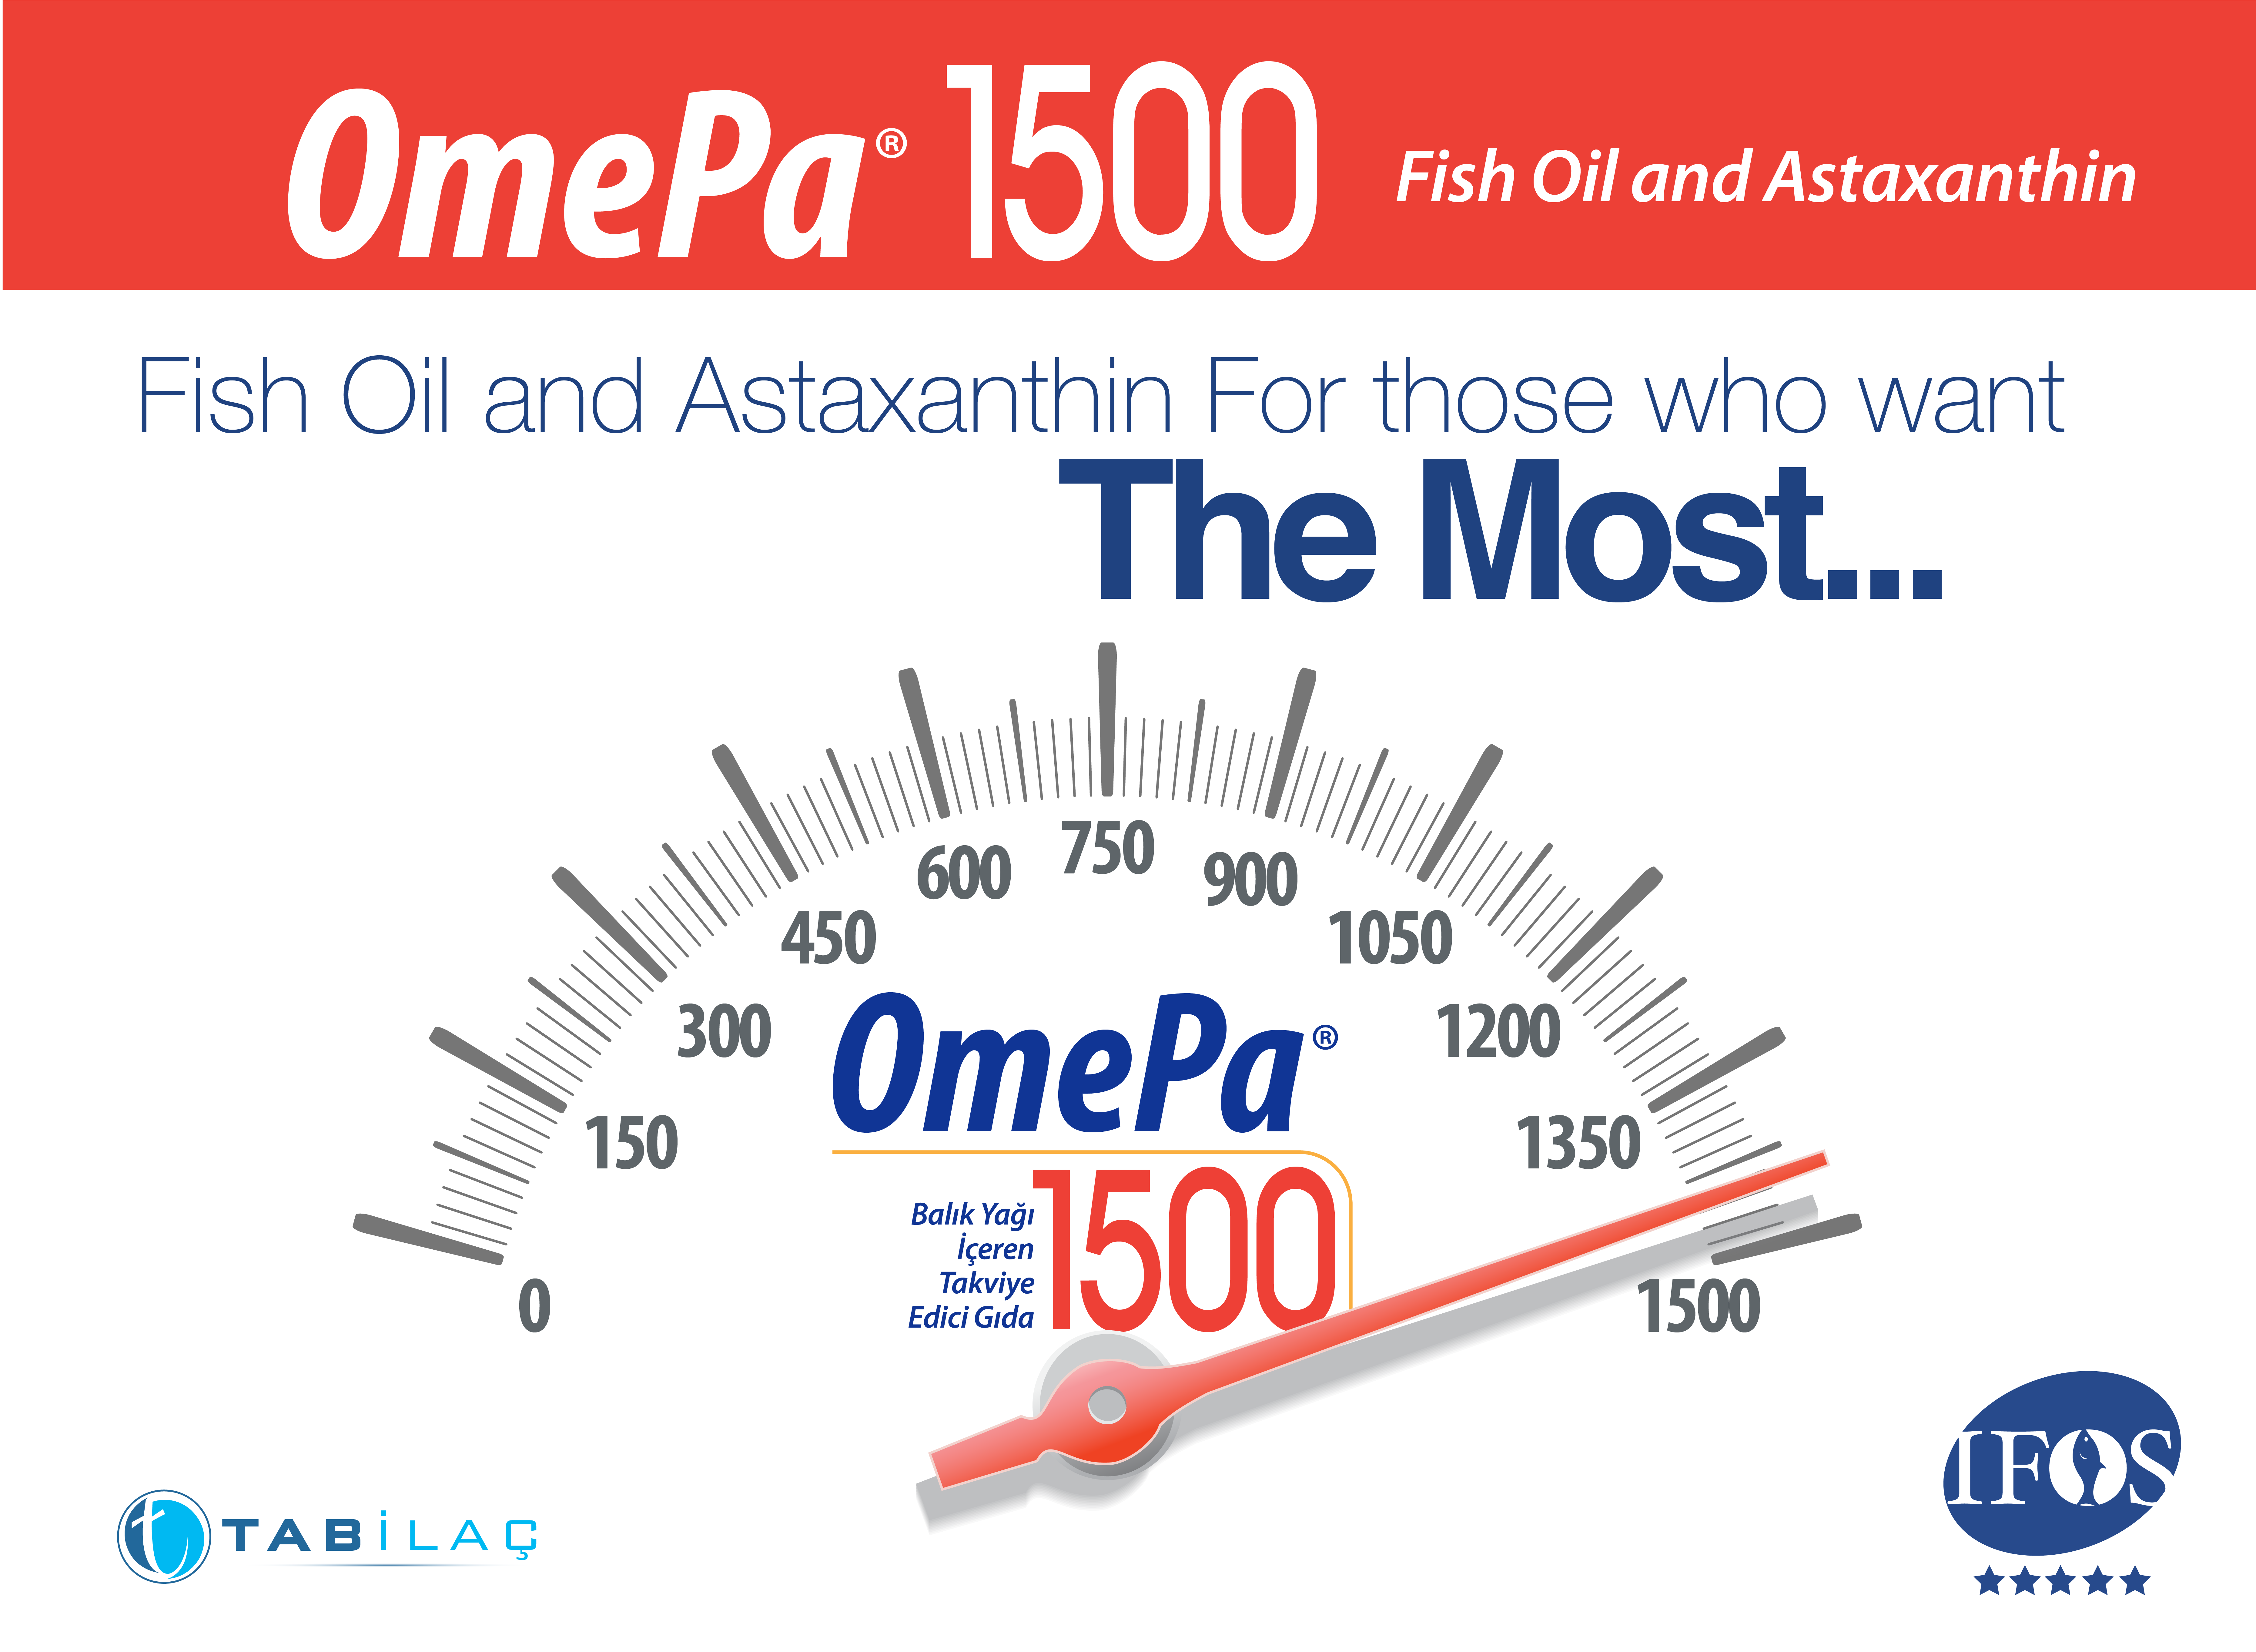 The one and only fish oil with the highest DHA per capsule**